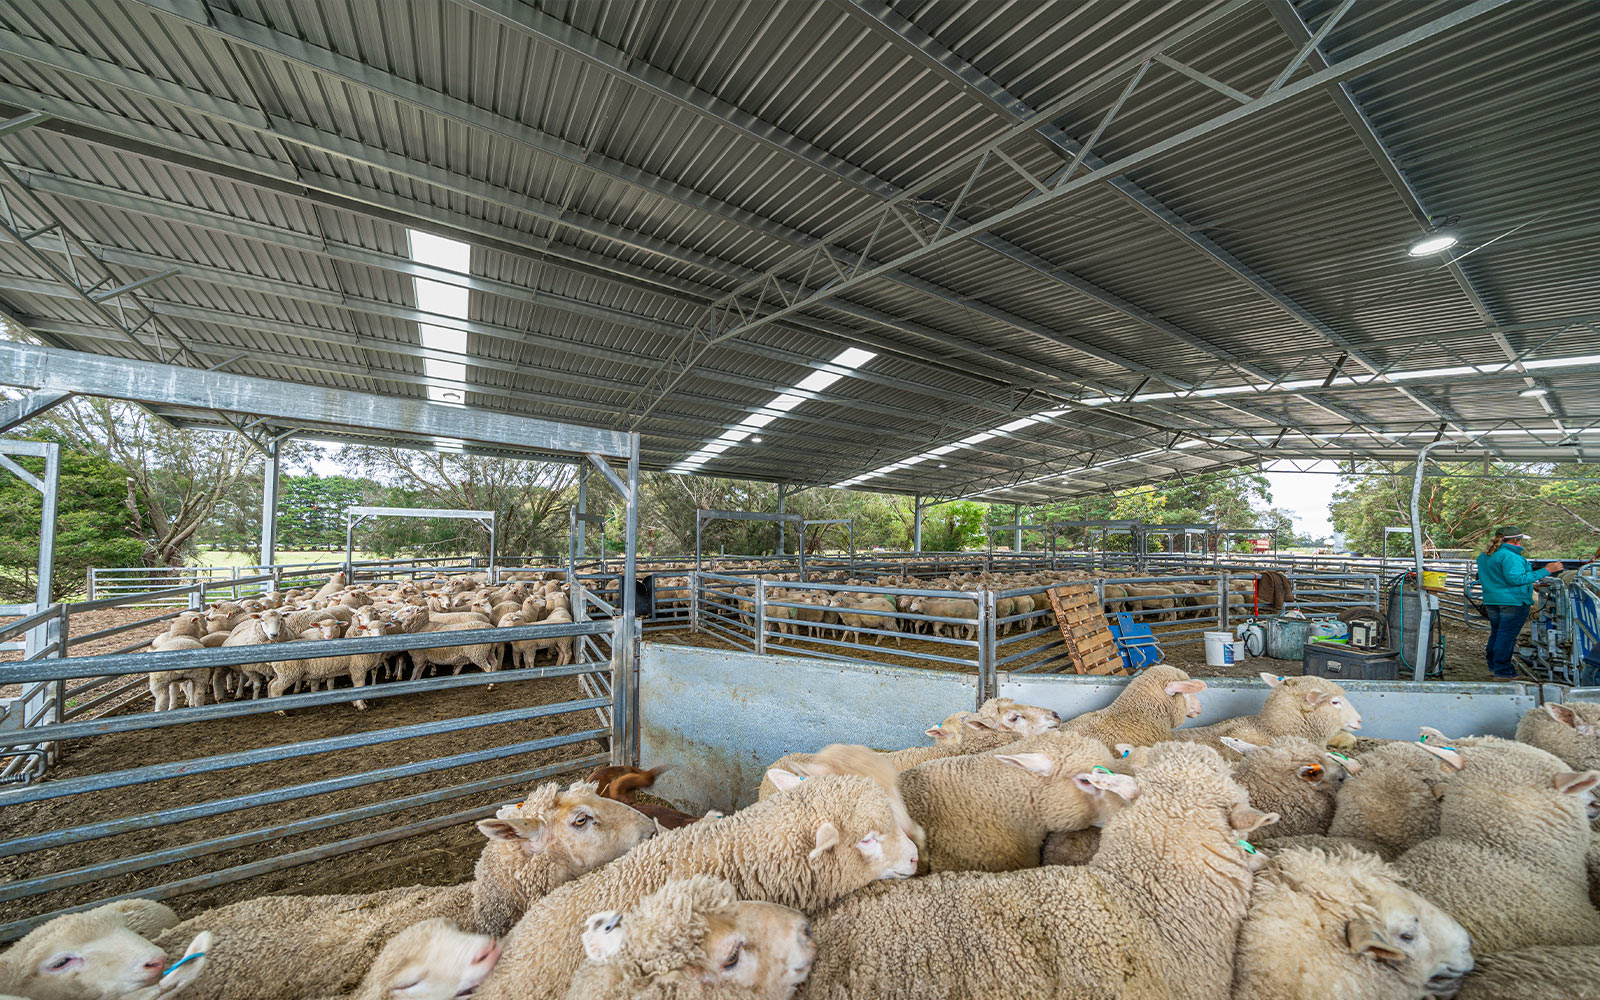 Agricultural sheep yard cover